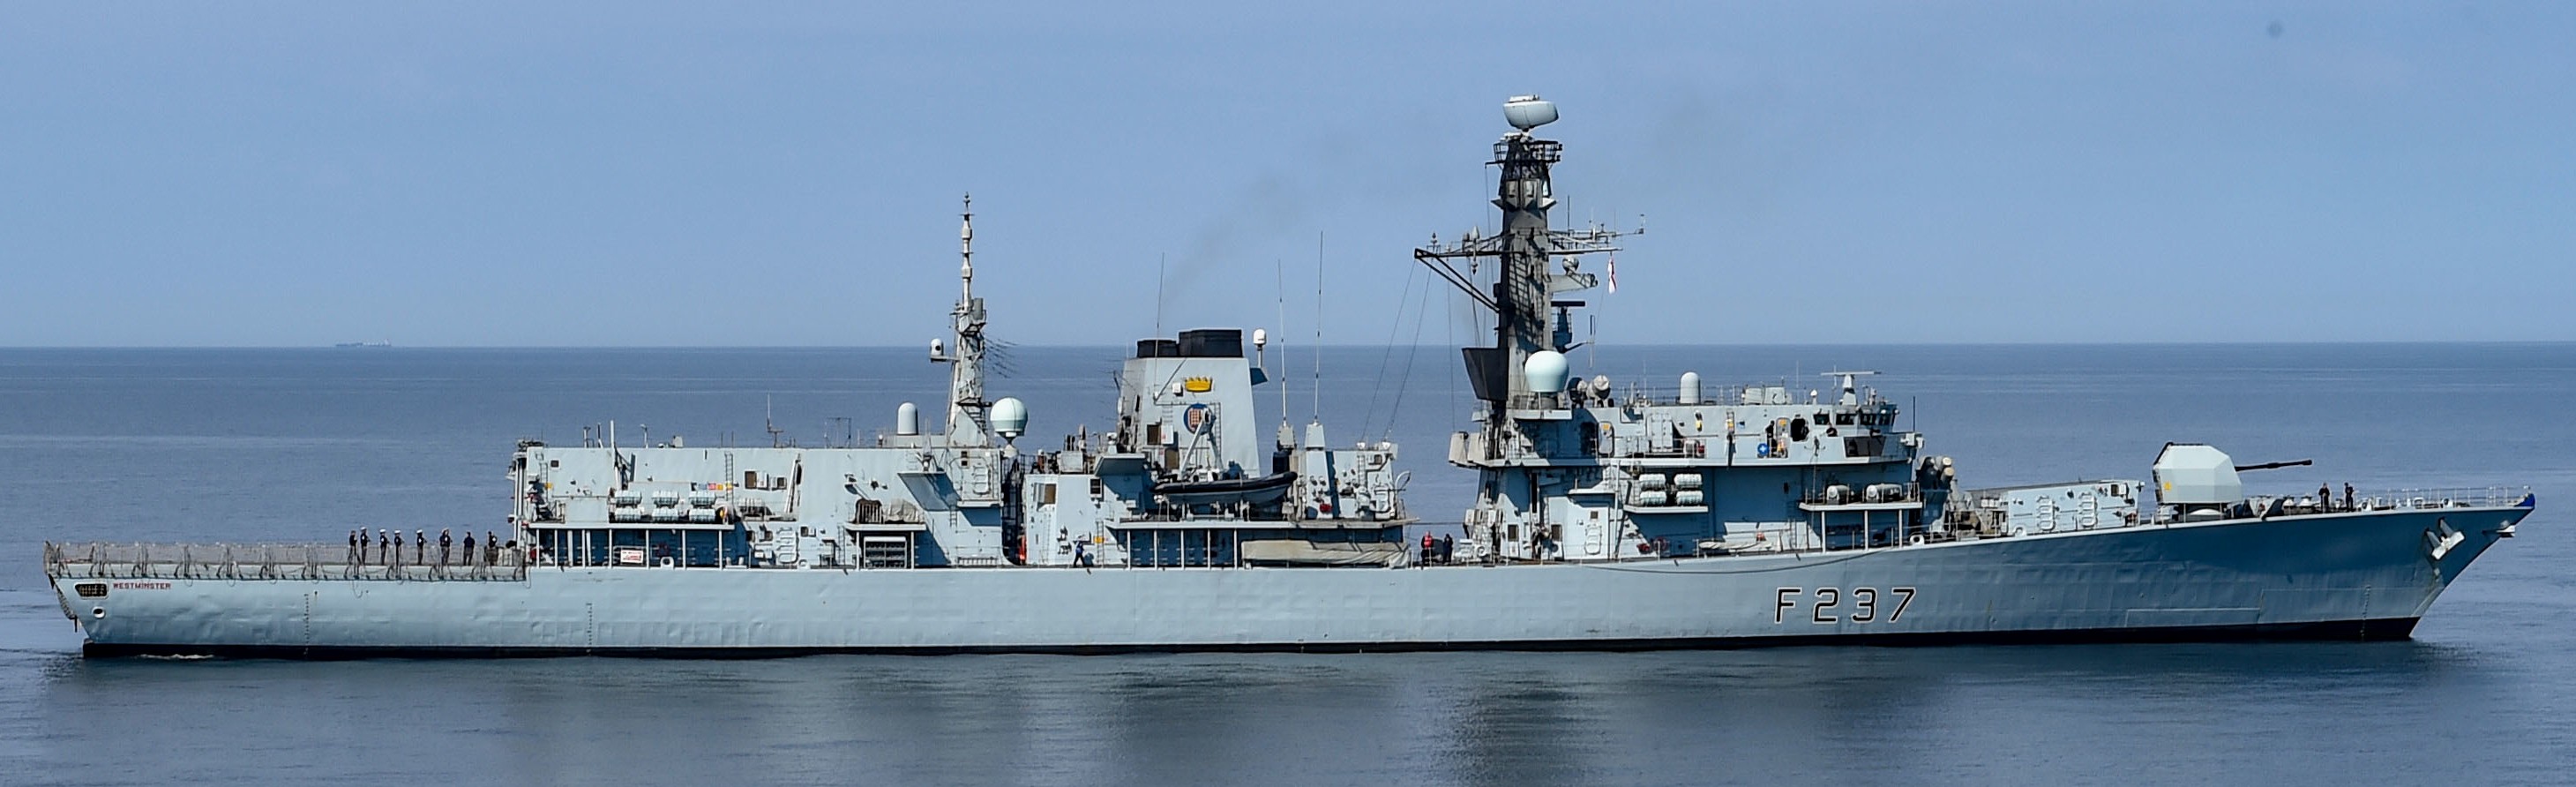 f-237 hms westminster type 23 duke class guided missile frigate ffg royal navy 27